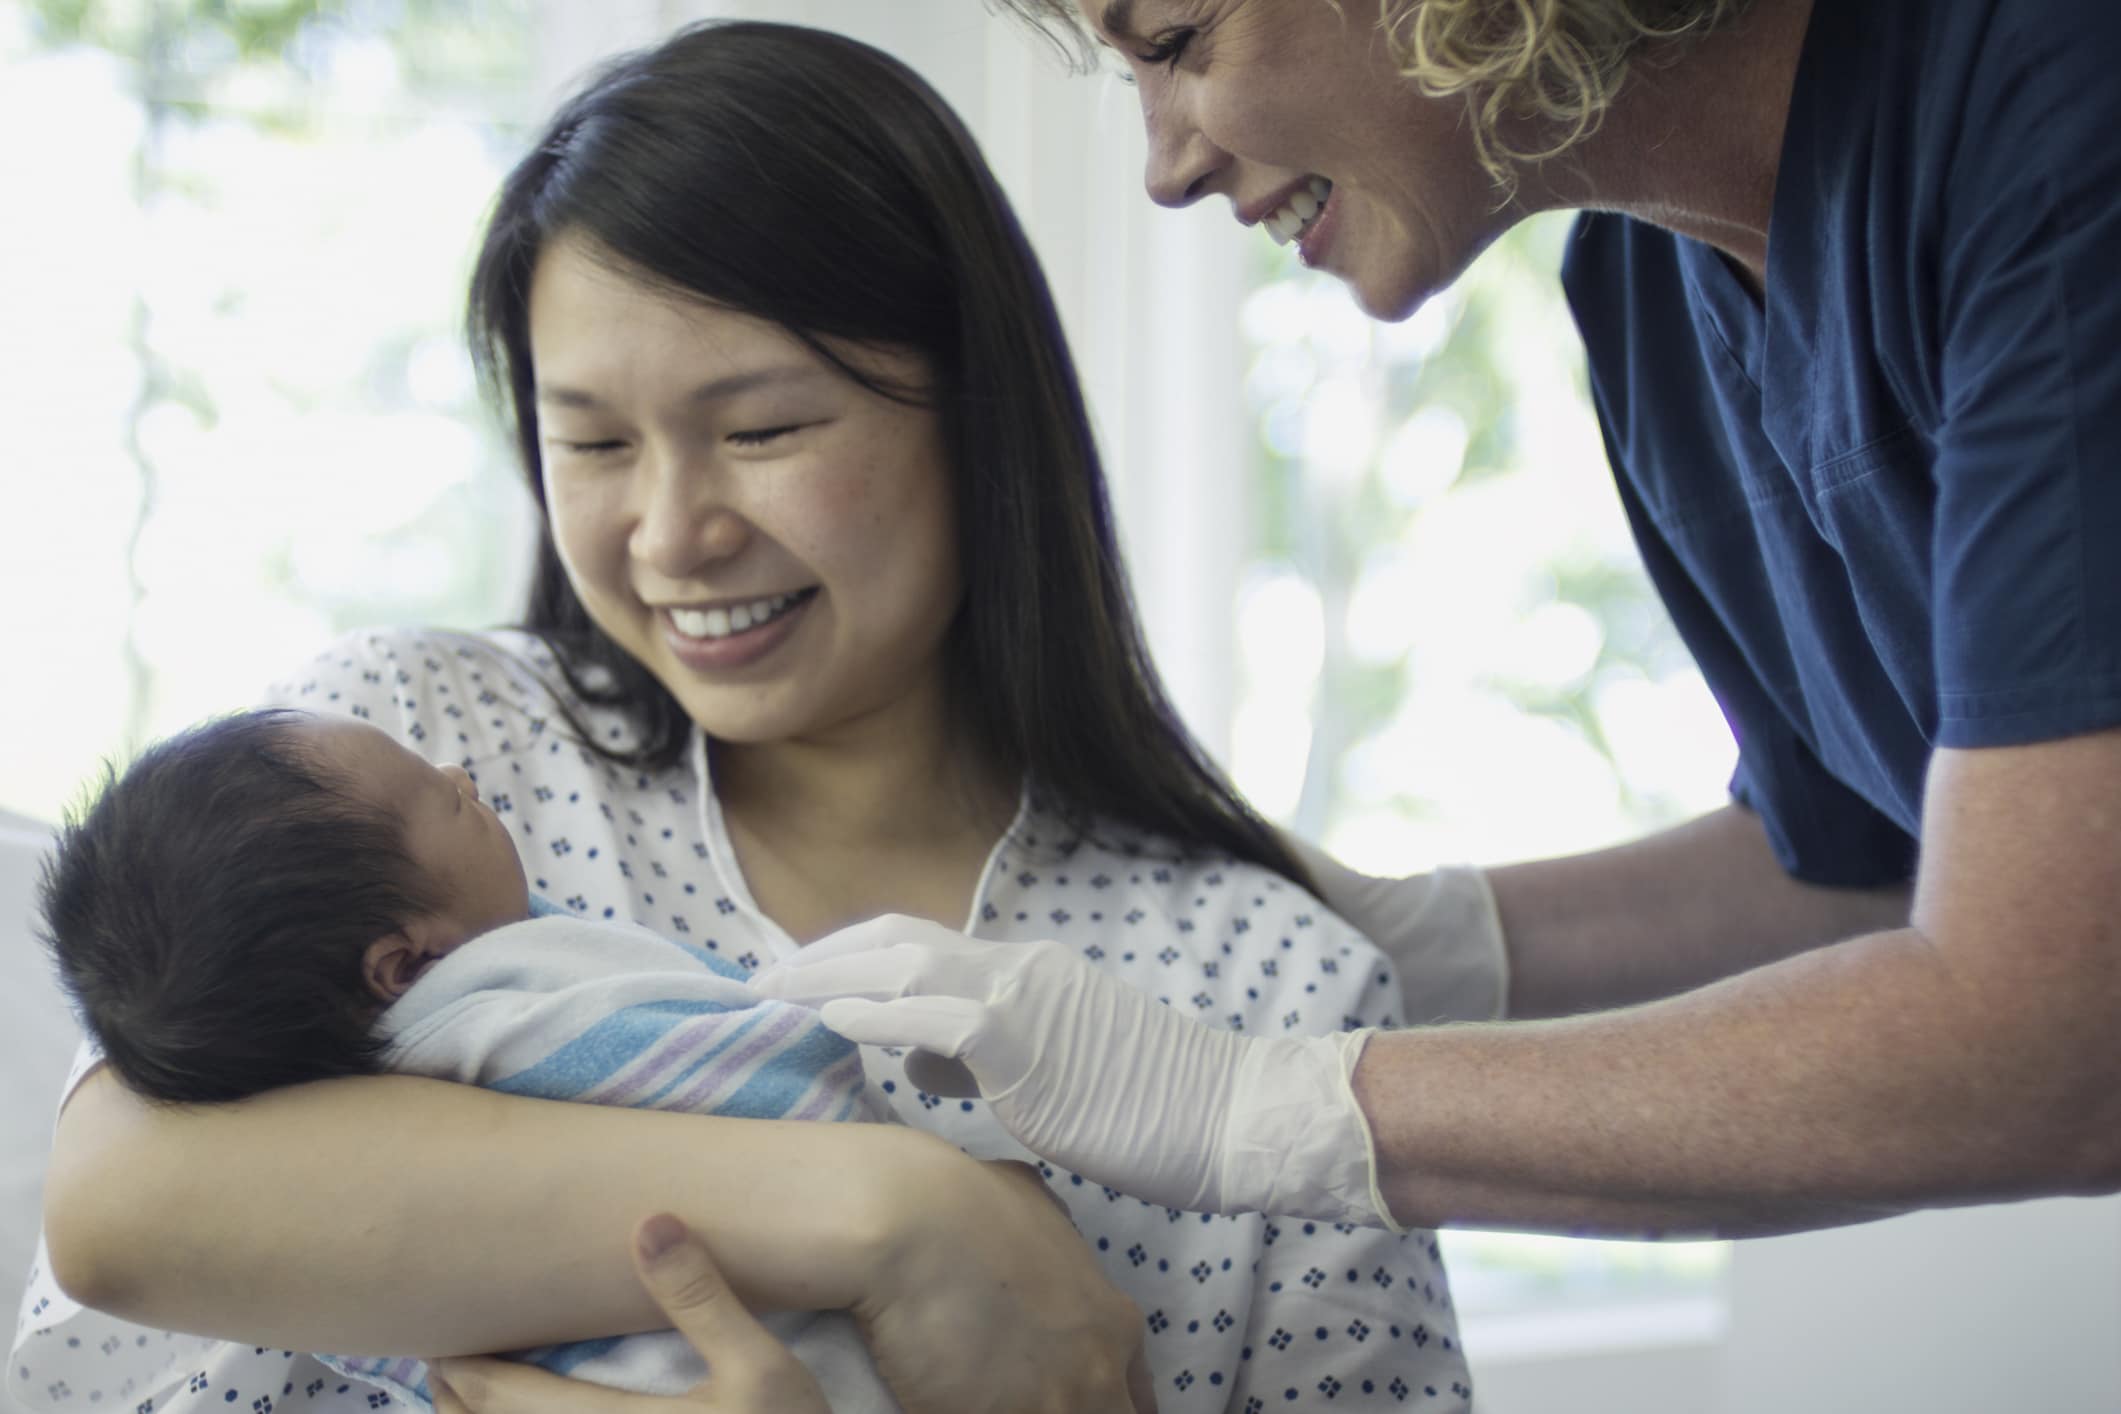 A woman of asian descent has just given birth in a hospital. In this frame a nurse is now handing her newborn child into her arms for the first time. Mom looks so proud and overjoyed to see her offspring after nine long months of waiting.